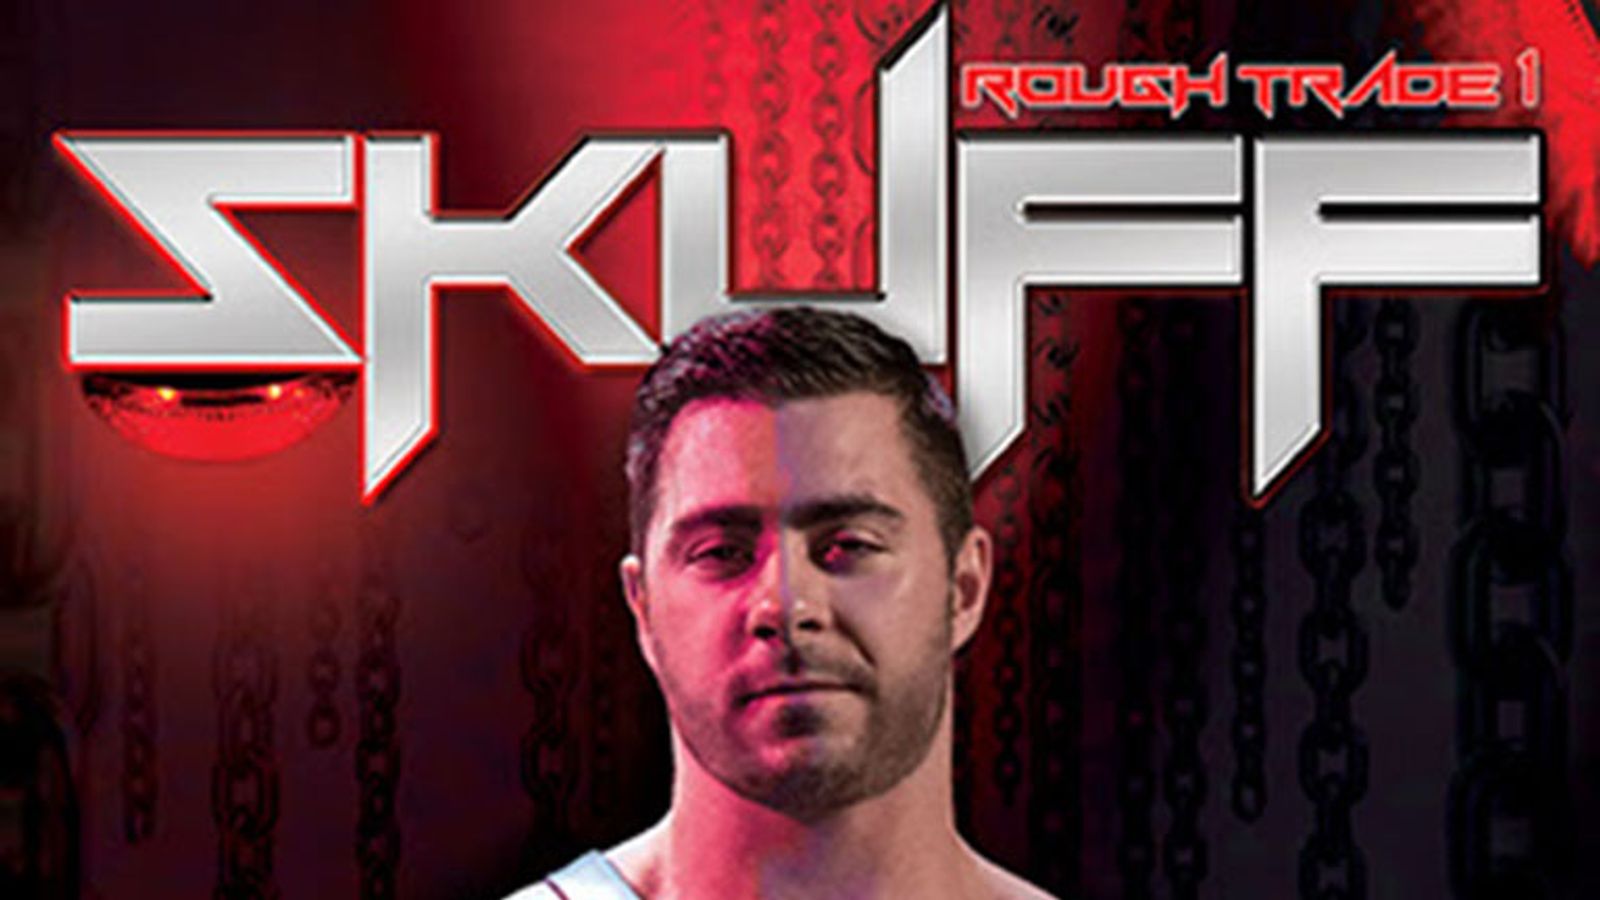 Hot House Delivers More ‘Skuff’ In 'Skuff: Rough Trade 1'